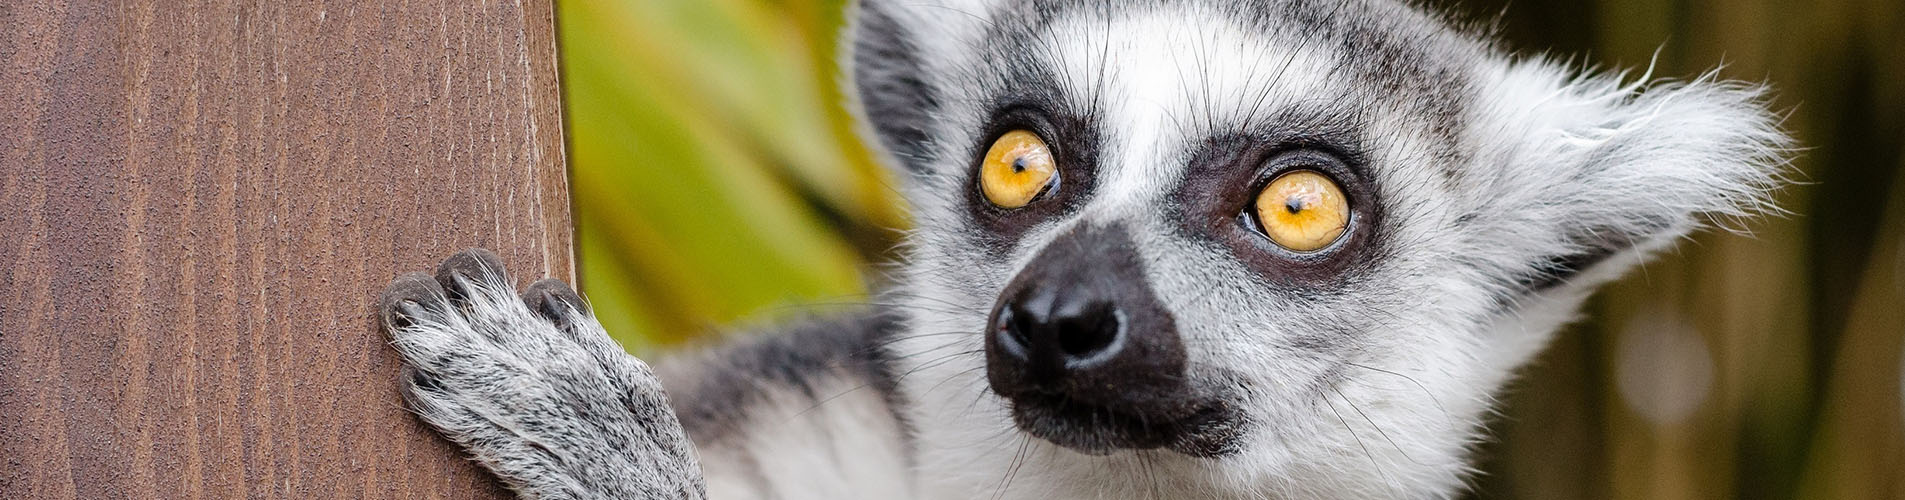 A close-up of a lemur's face and ear